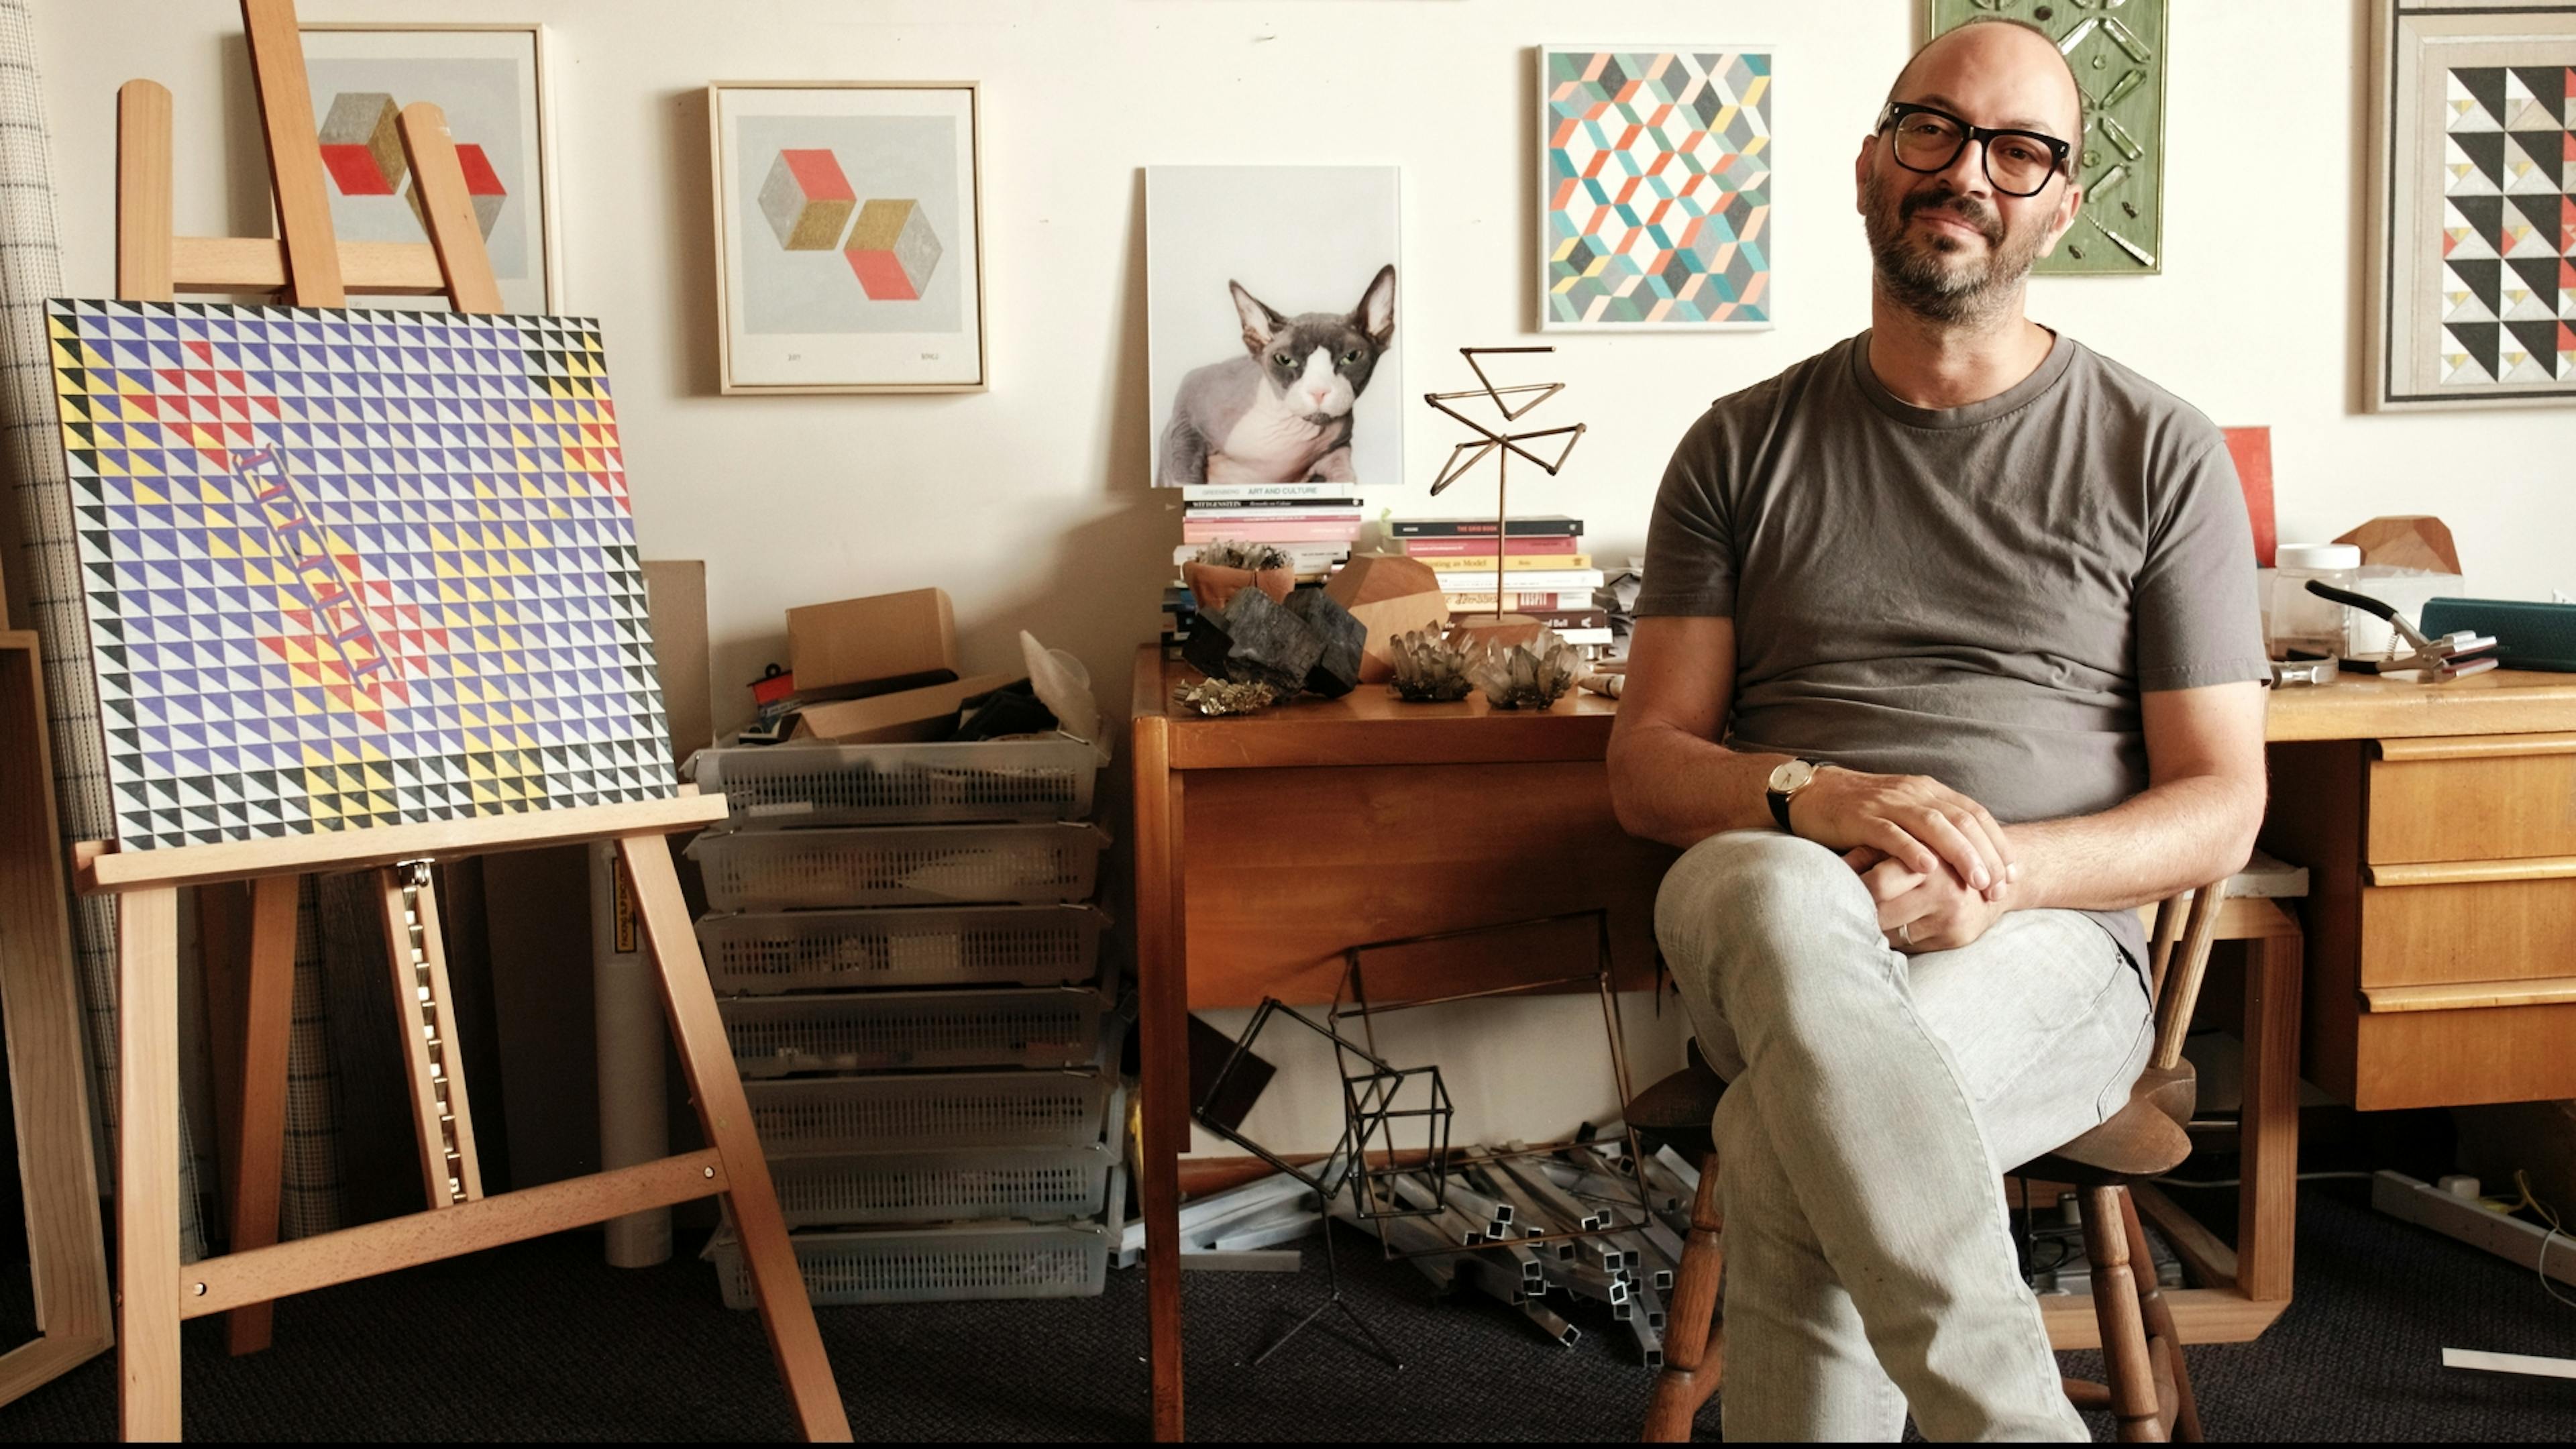 Aotearoa New Zealand artist Bonco in his Tamaki Makaura Auckland studio. Surrounded by his paintings and other curiosities. 